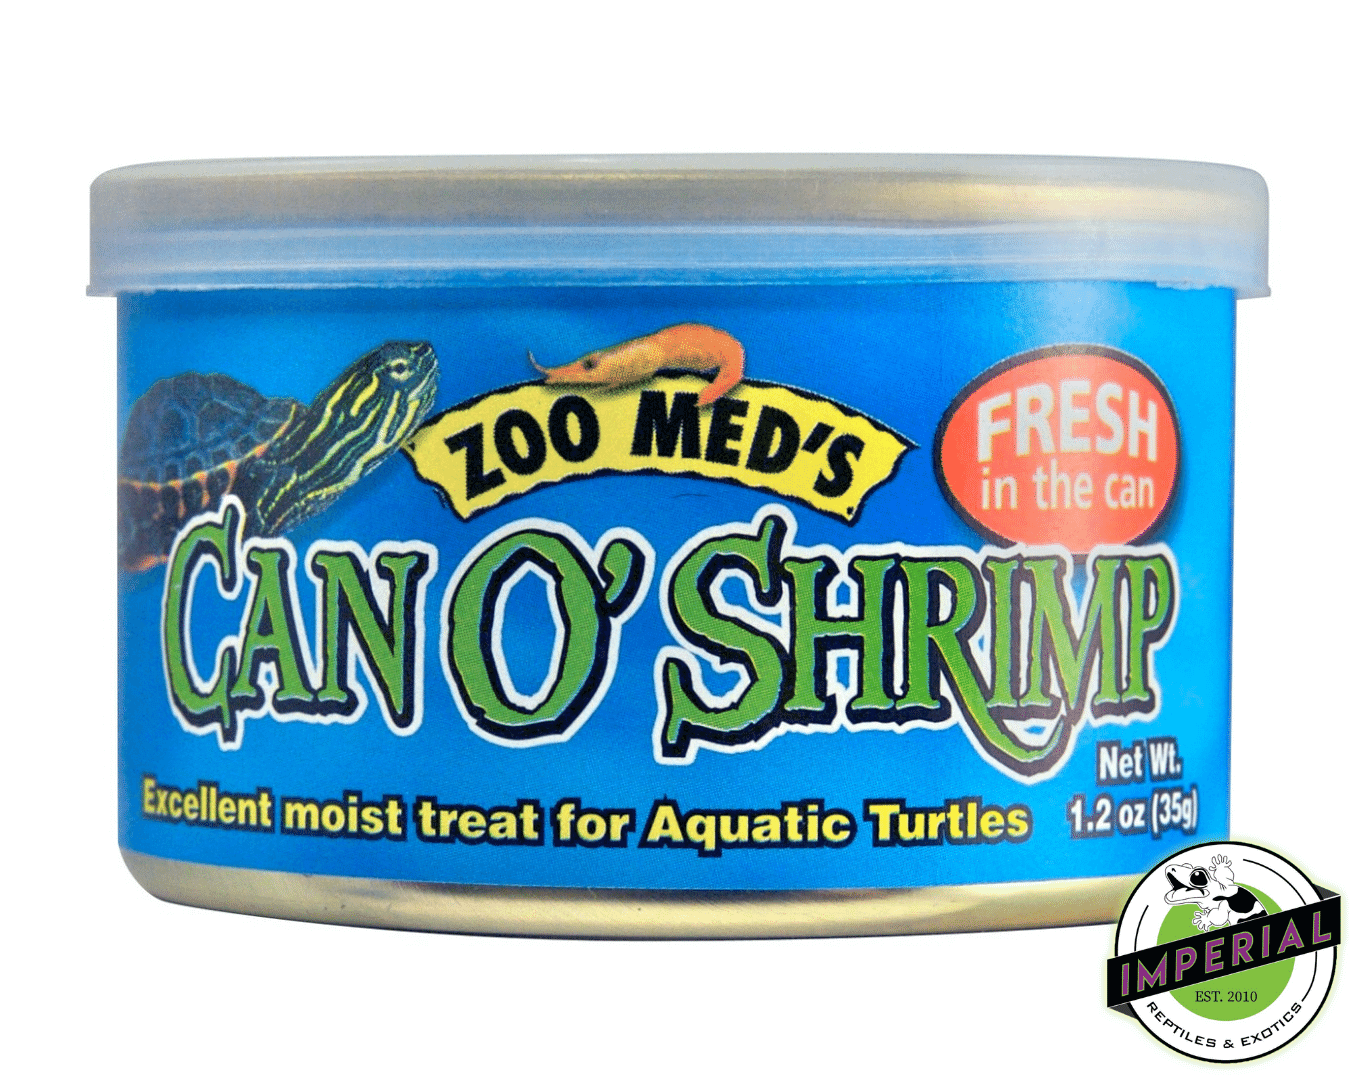 Buy canned shrimp for sale online at cheap prices.